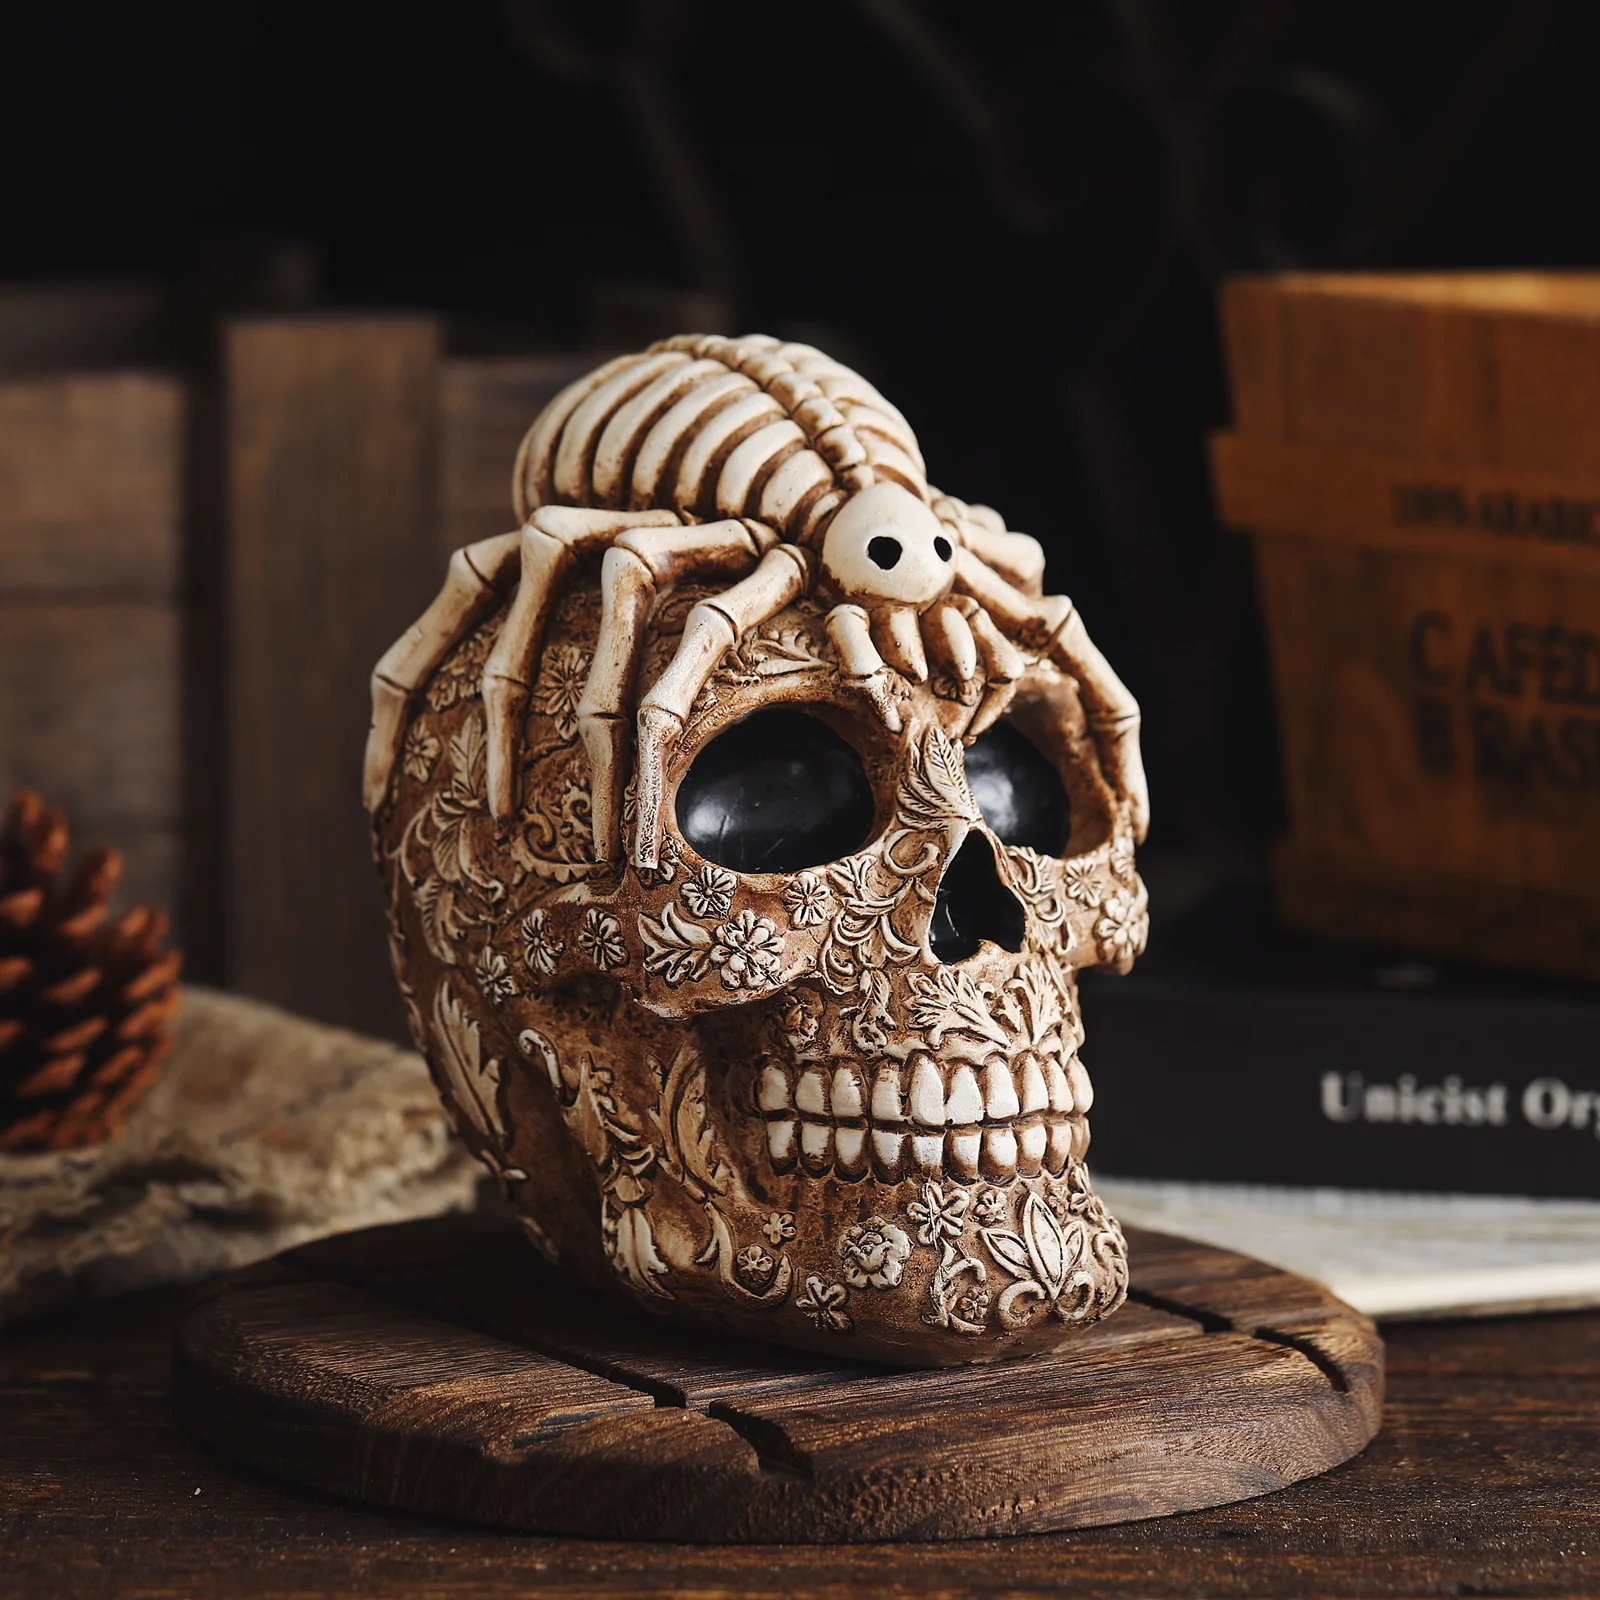 

Dropshipping Creative Skull And Spider Resin Statues Skeleton Home Office Desk Decor Birthday Gift Halloween Party Decoration